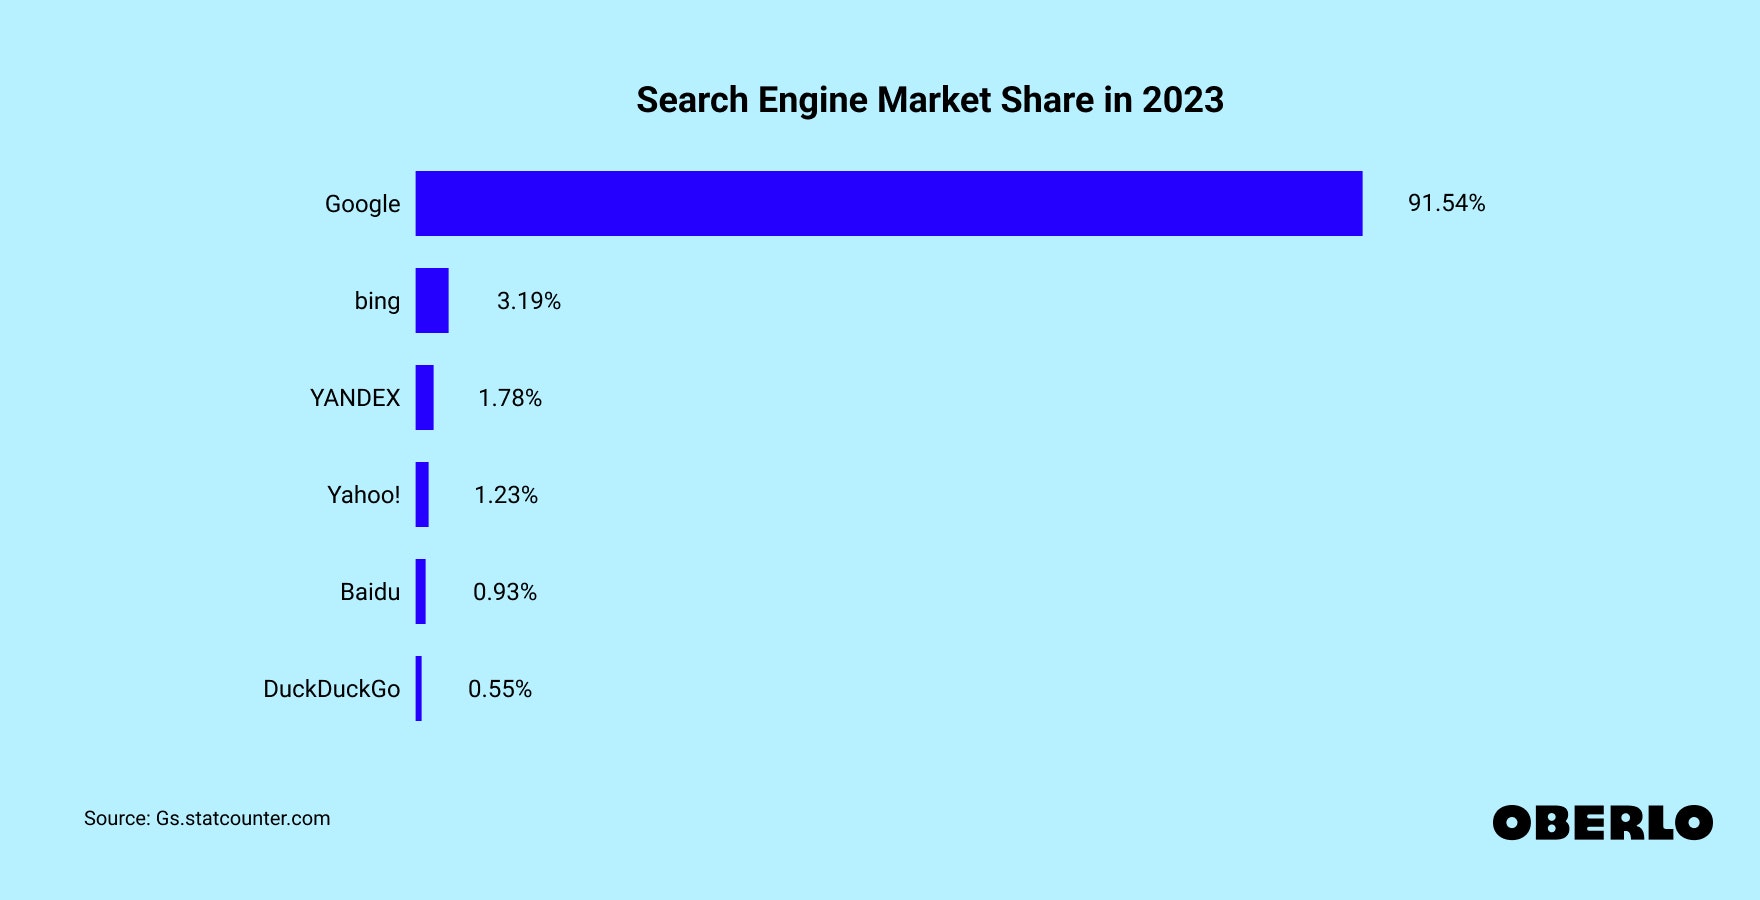 Chart showing the Search Engine Market Share in 2023